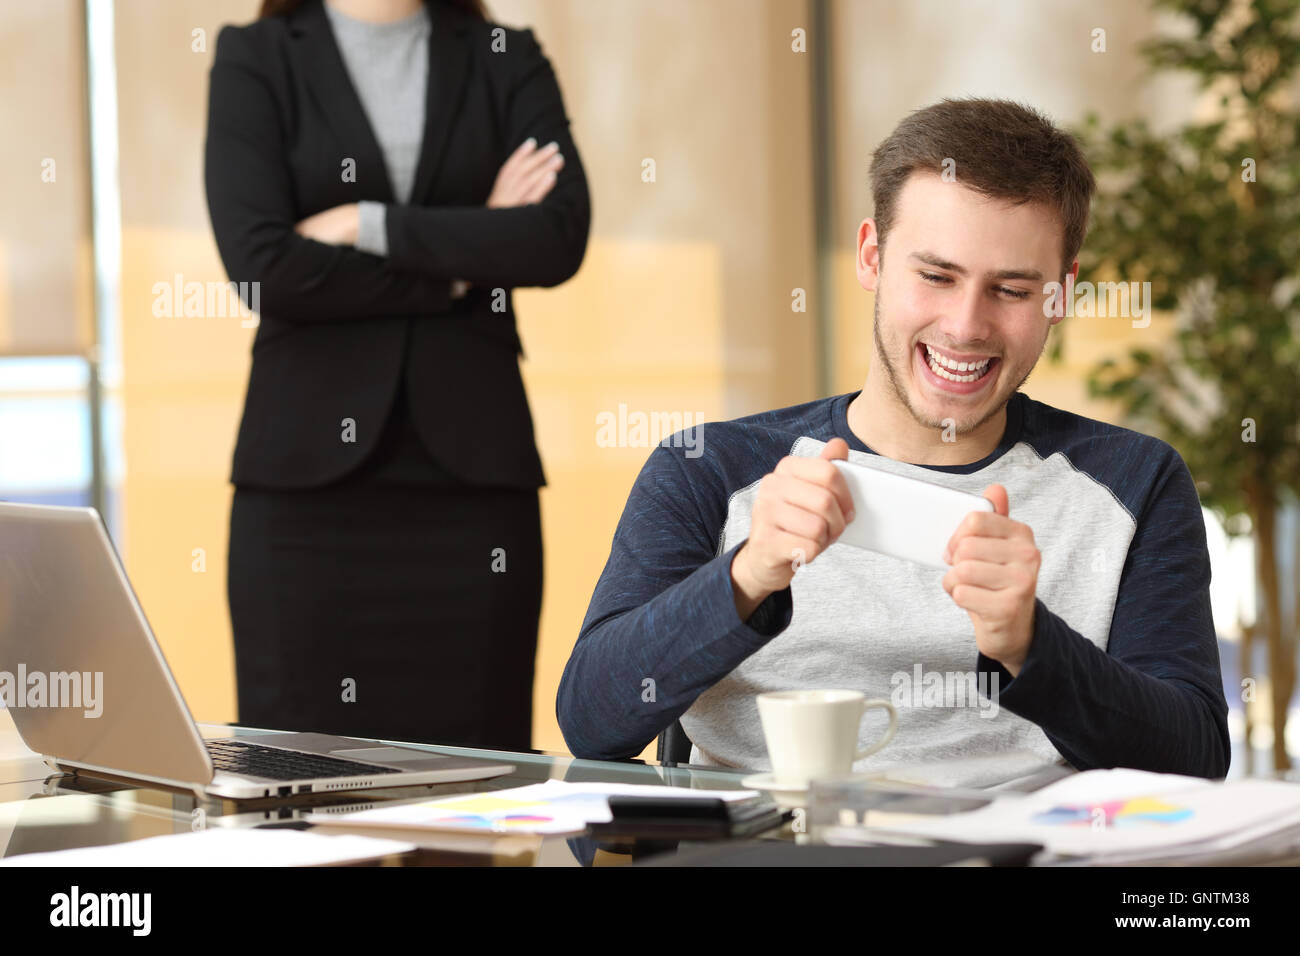 Lazy employee playing games with his smartphone sitting in a desktop while his angry boss is watching at office Stock Photo